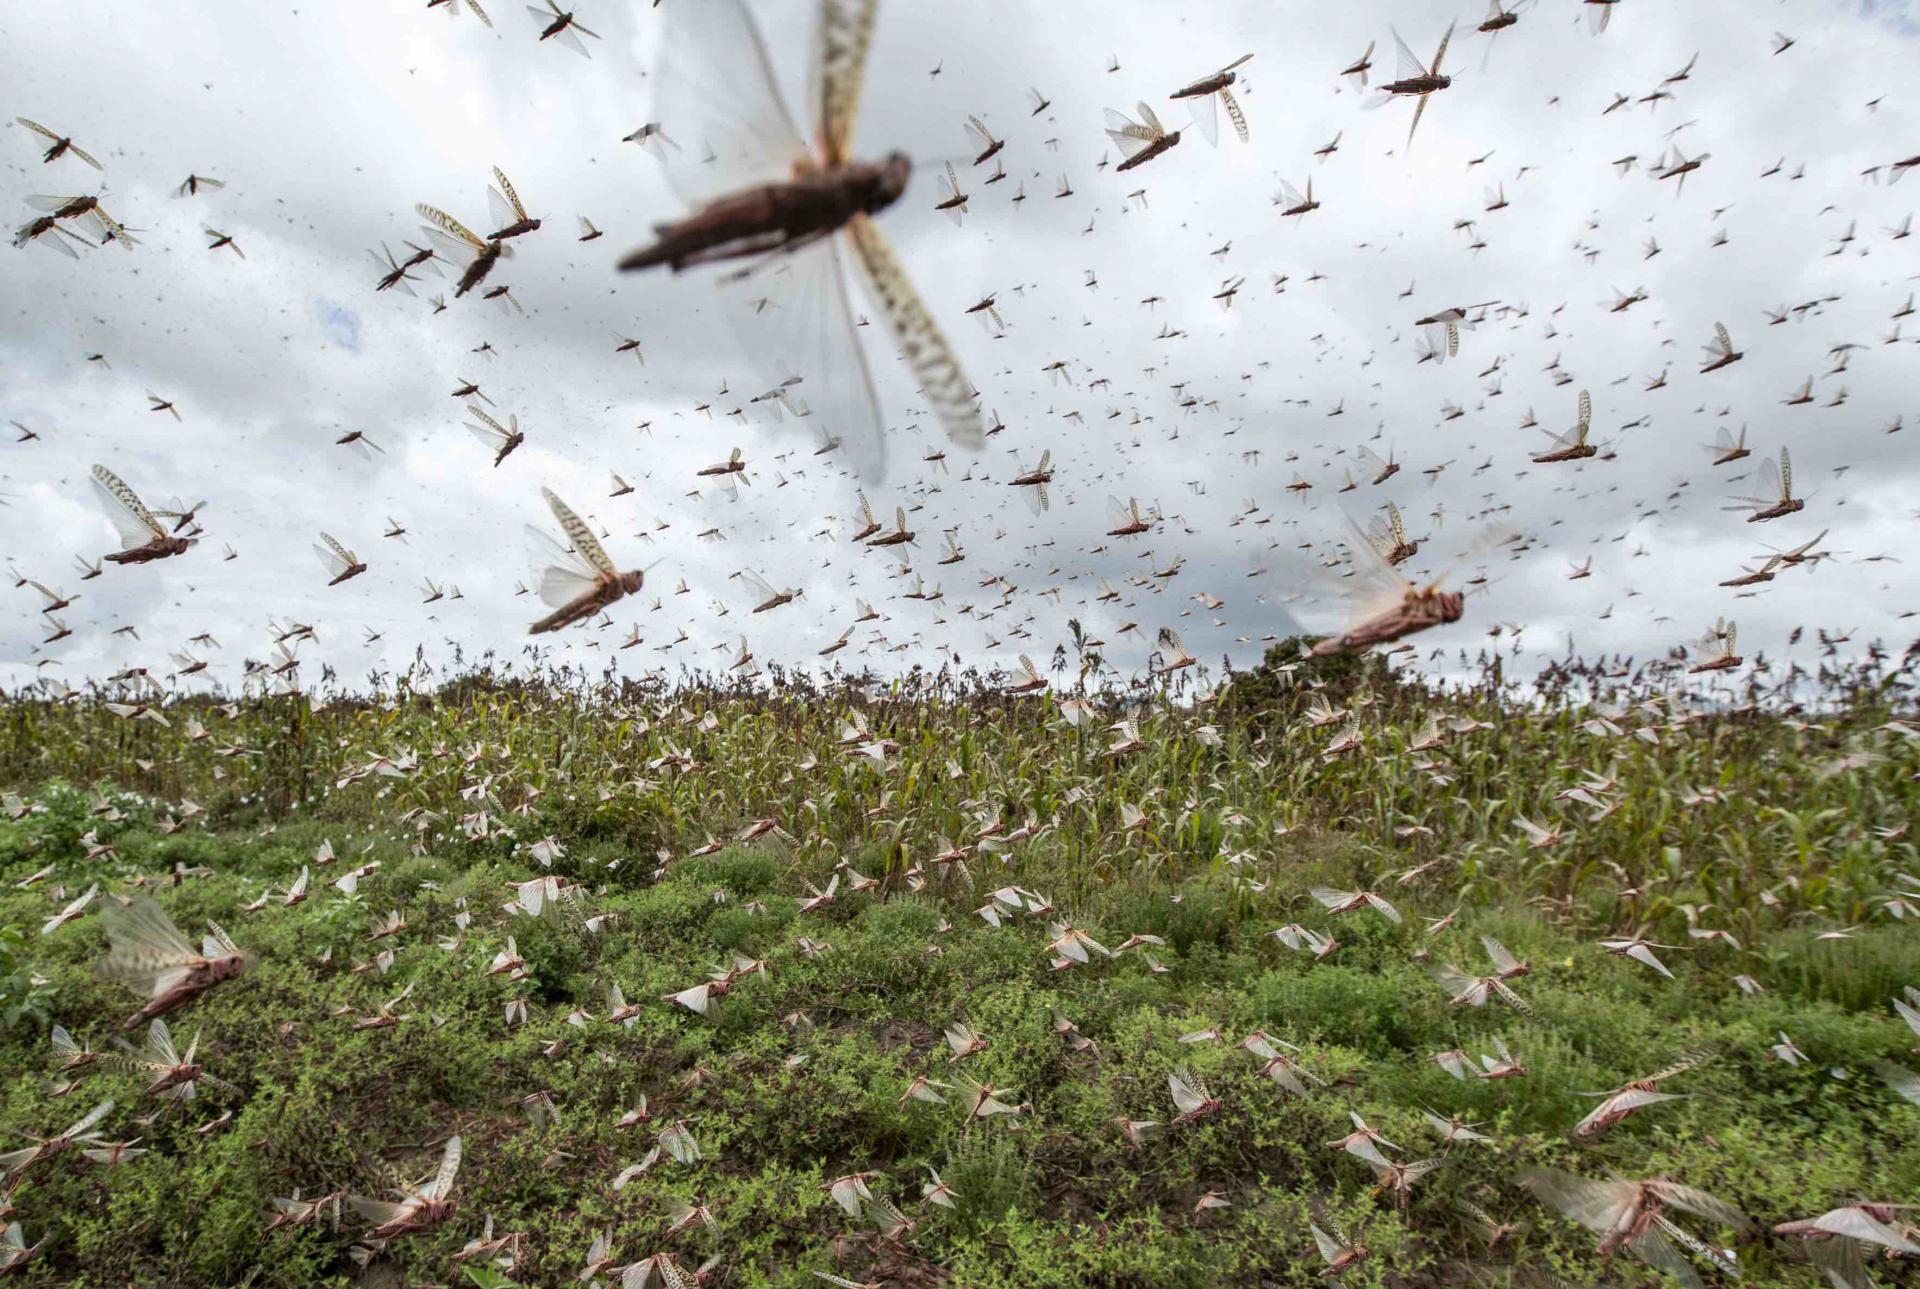 Experts say the locust swarms are the result of extreme weather swings